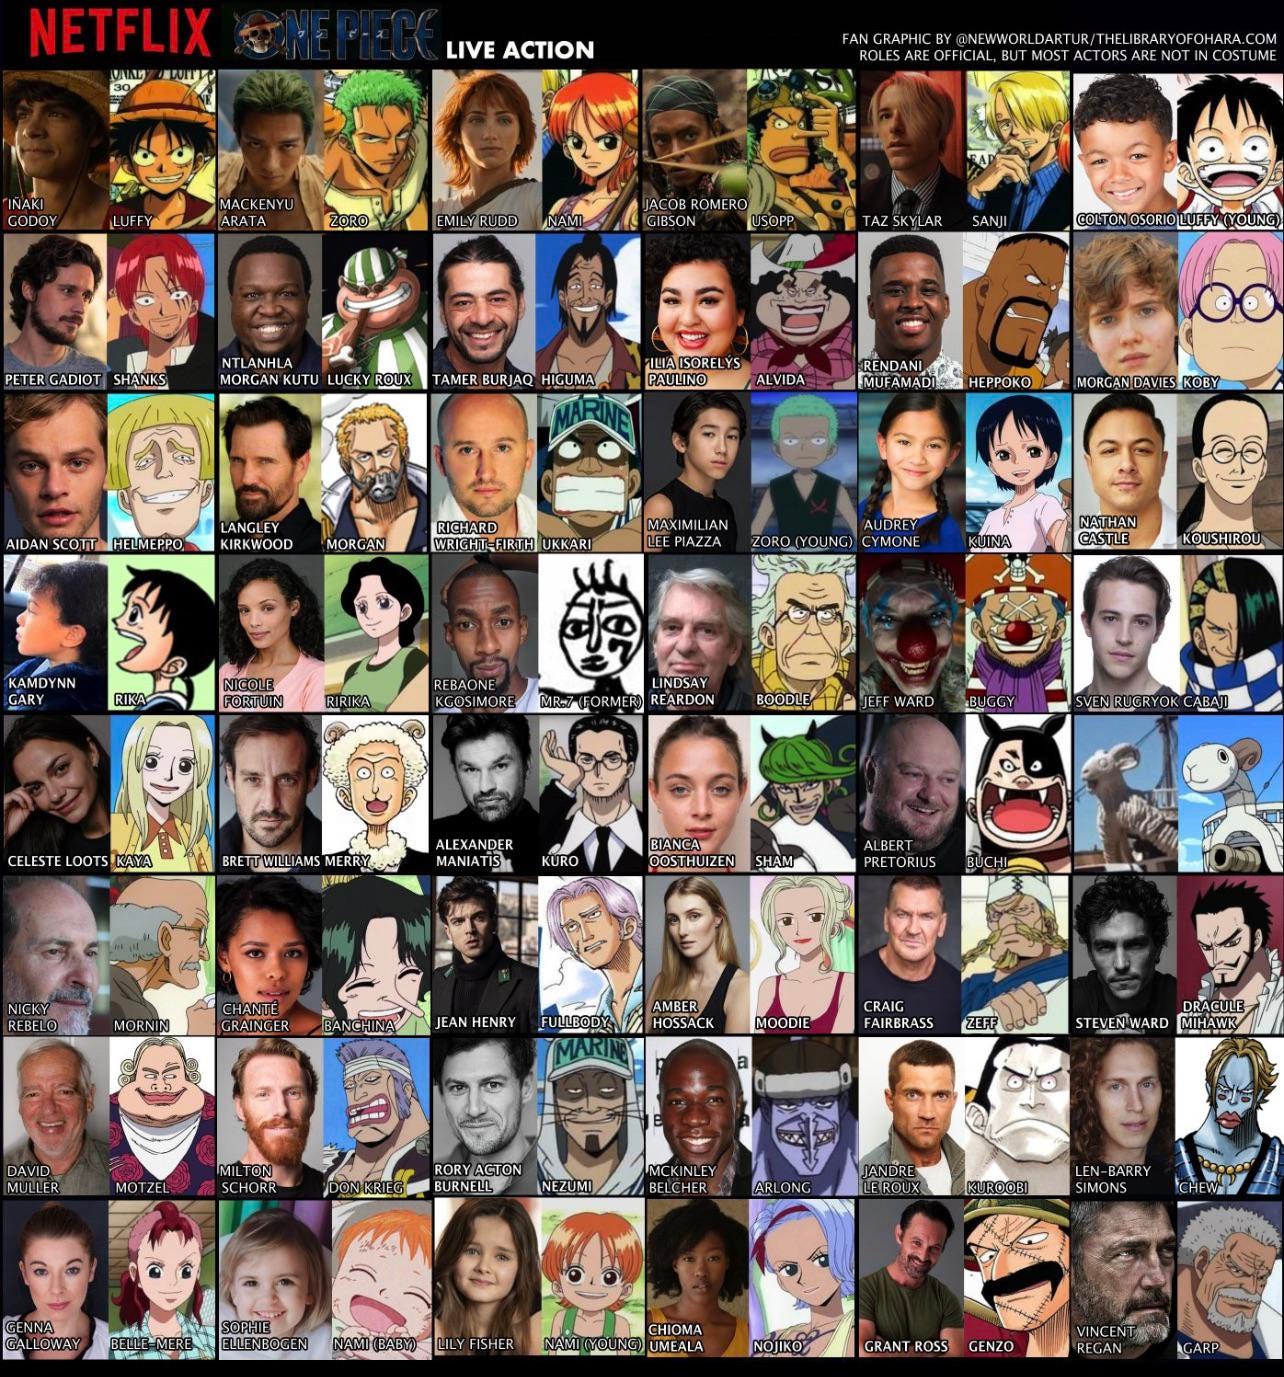 Netflix's One Piece: Mihawk Actor Shares Behind The Scenes Look at